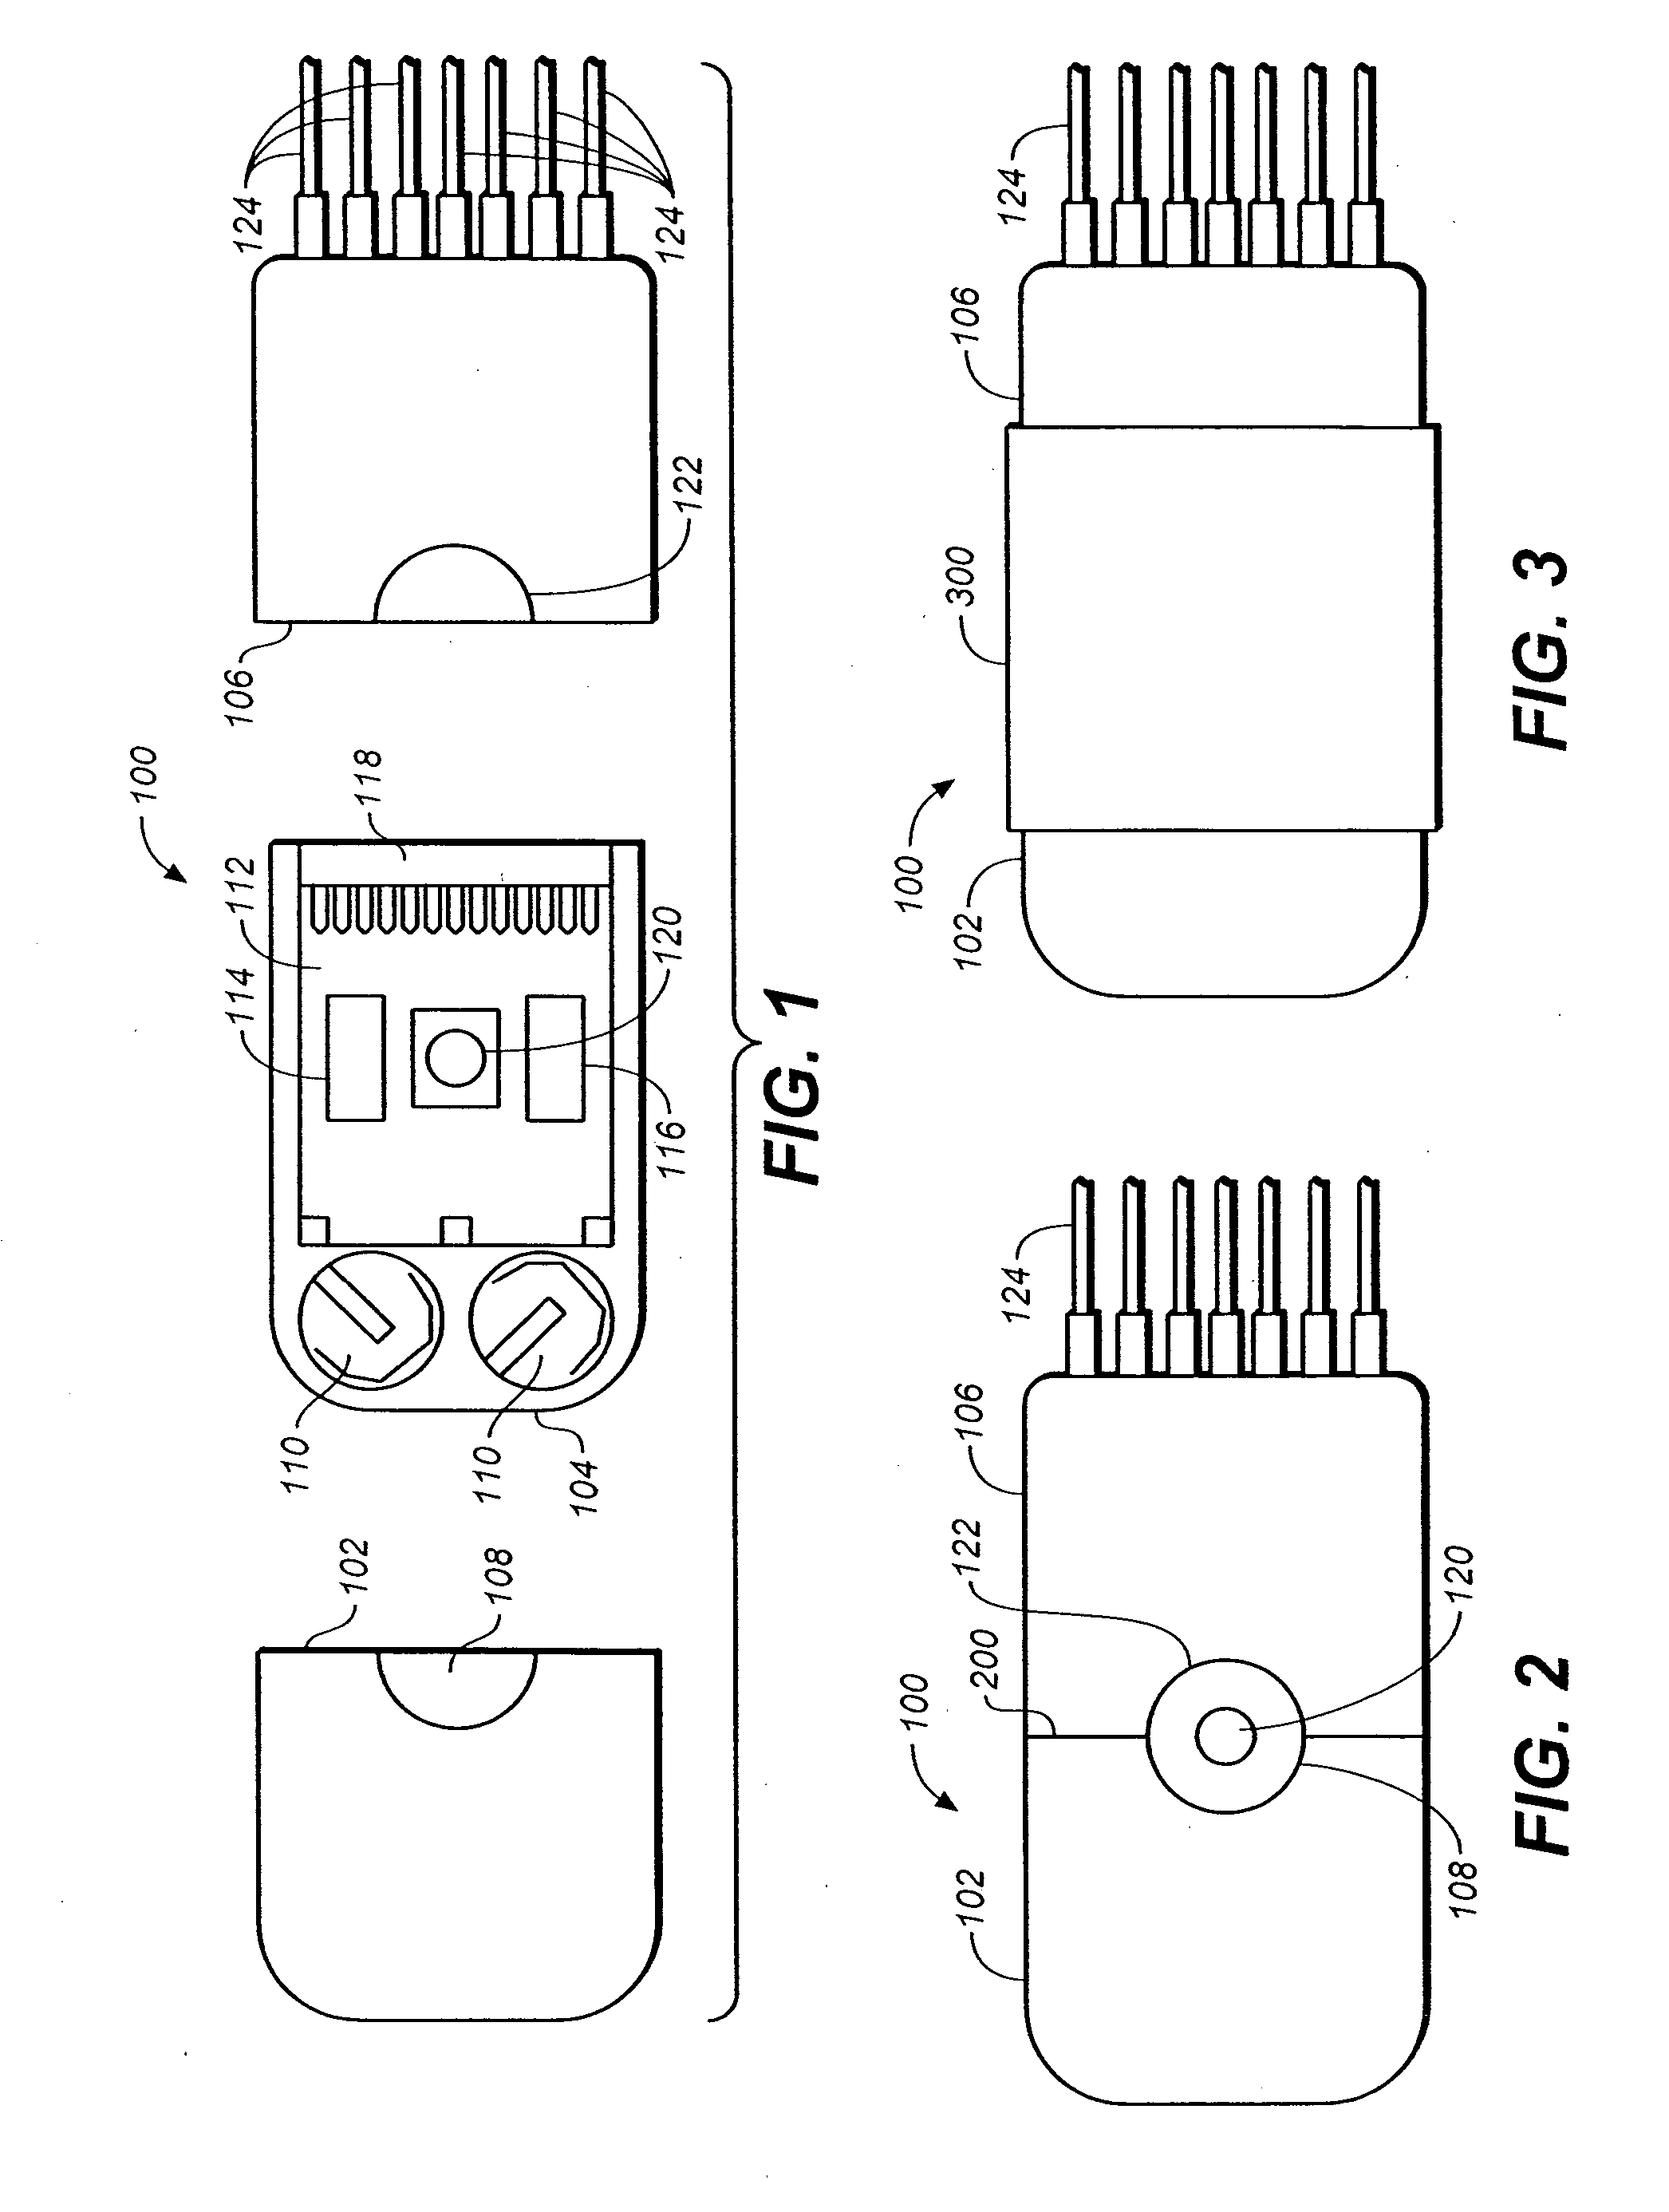 Portable cardiac monitor including pulsed power operation